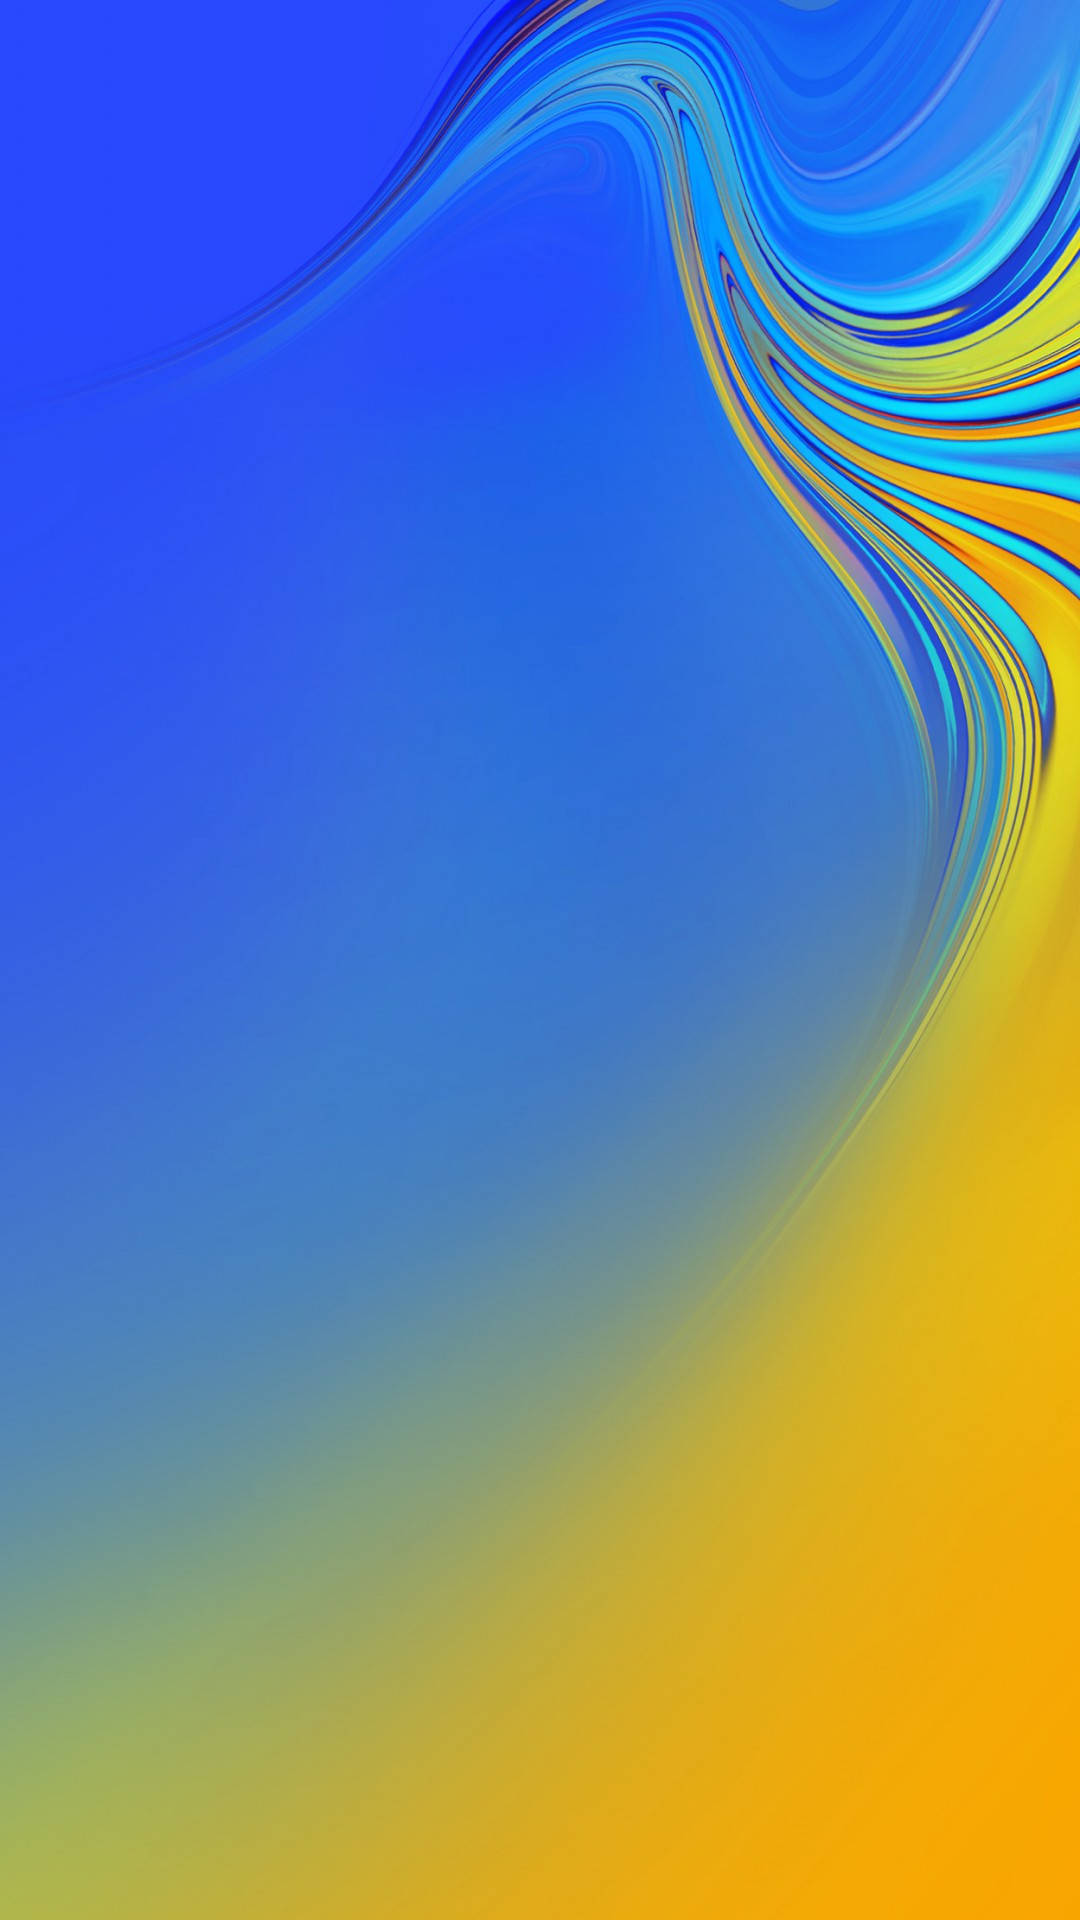 Experience the beauty of Colorful Amoled Wallpaper